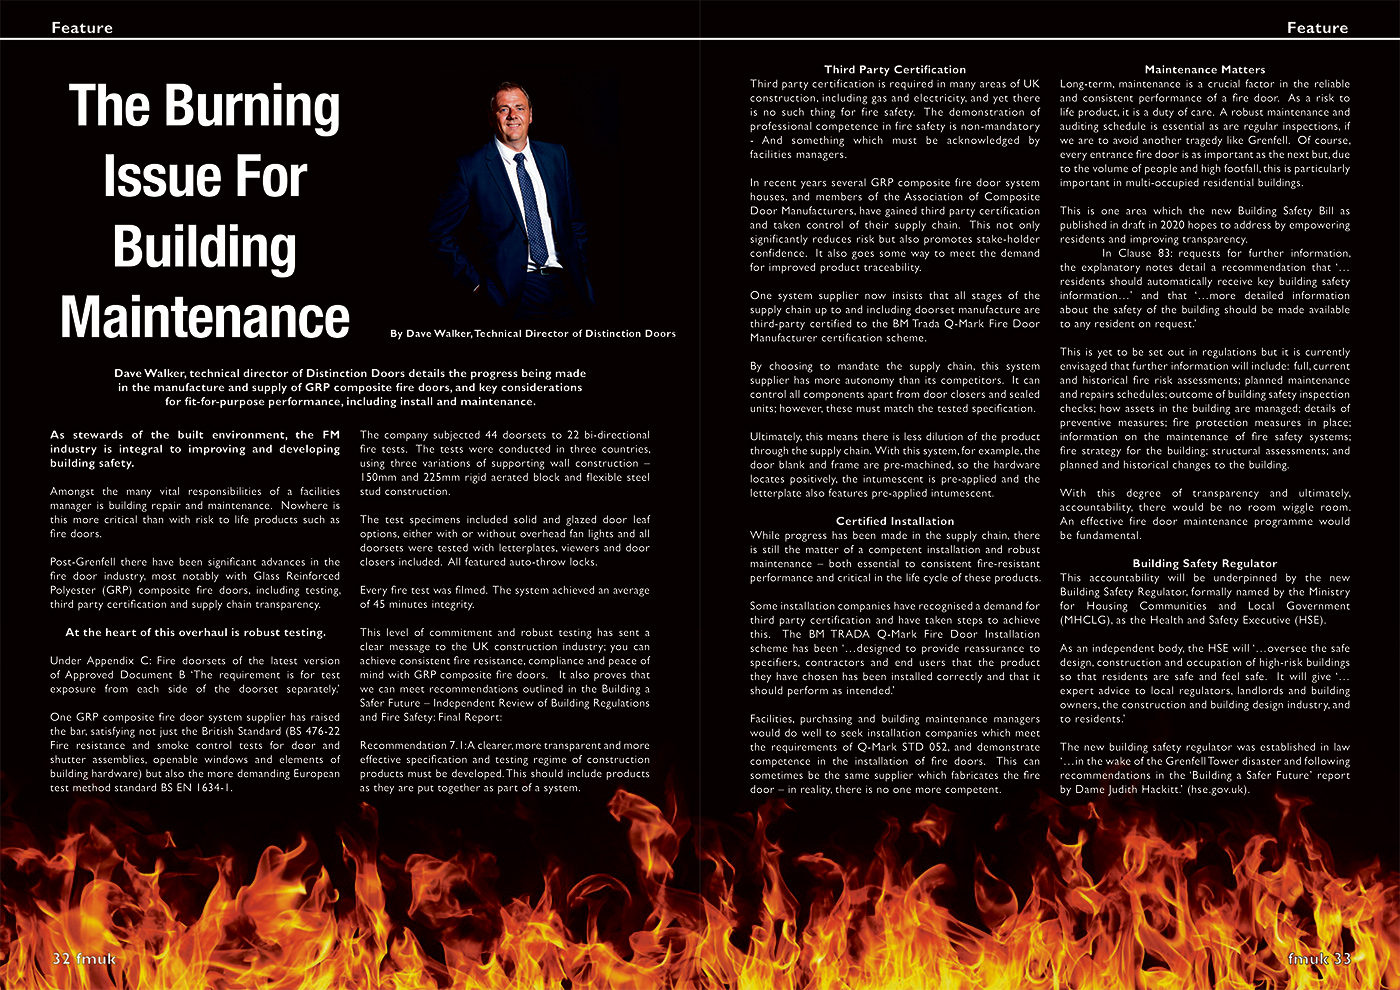 The Burning Issue For Building Maintenance